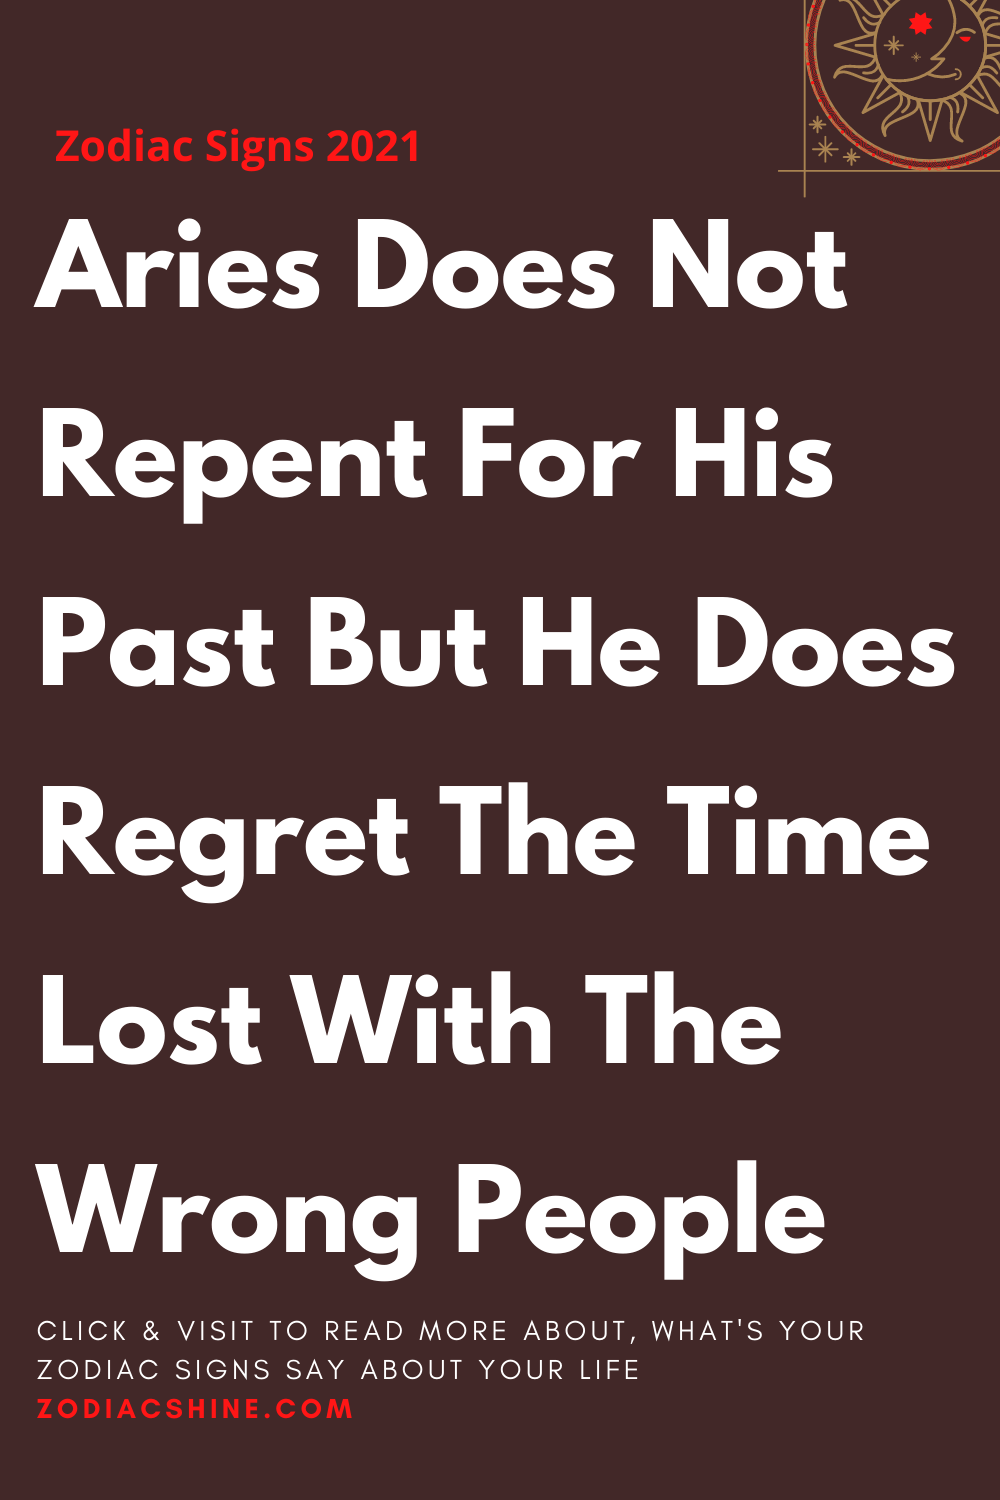 Aries Does Not Repent For His Past But He Does Regret The Time Lost With The Wrong People